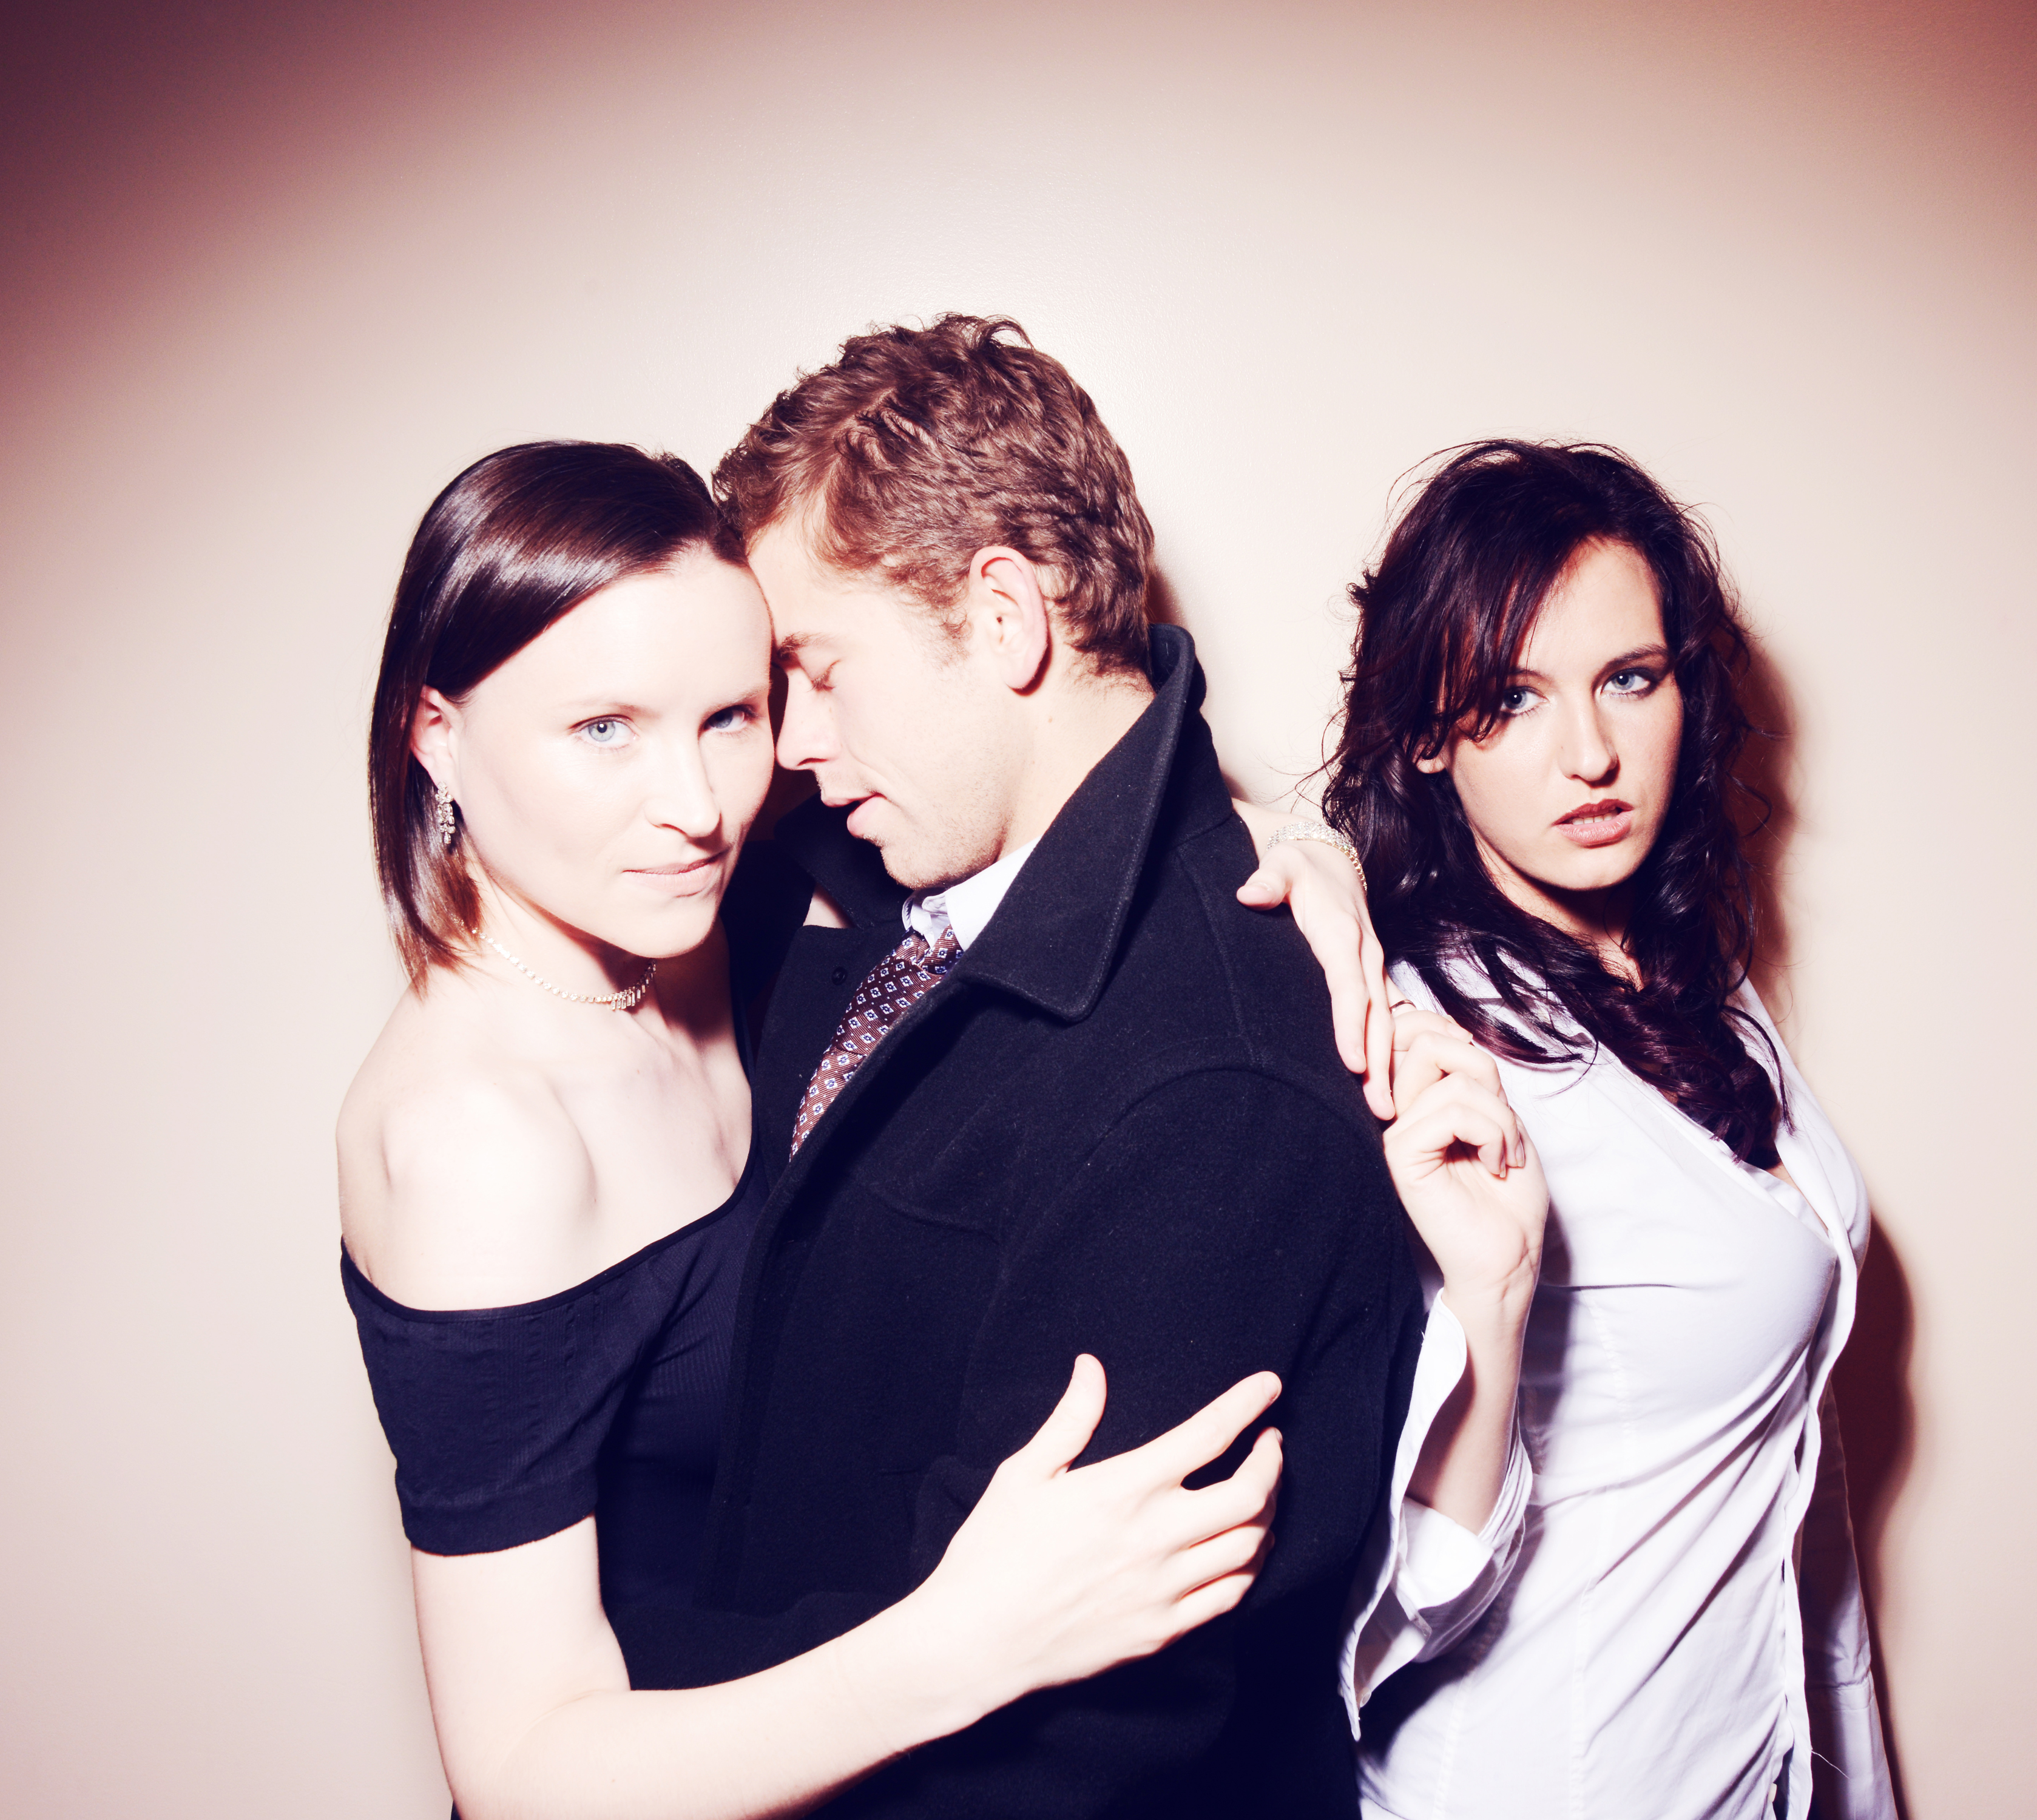 Promo photo with Crawford Collins, Ben Leasure and Miranda Macauley the stars in PL Entertainment's Lover's Game ('13)